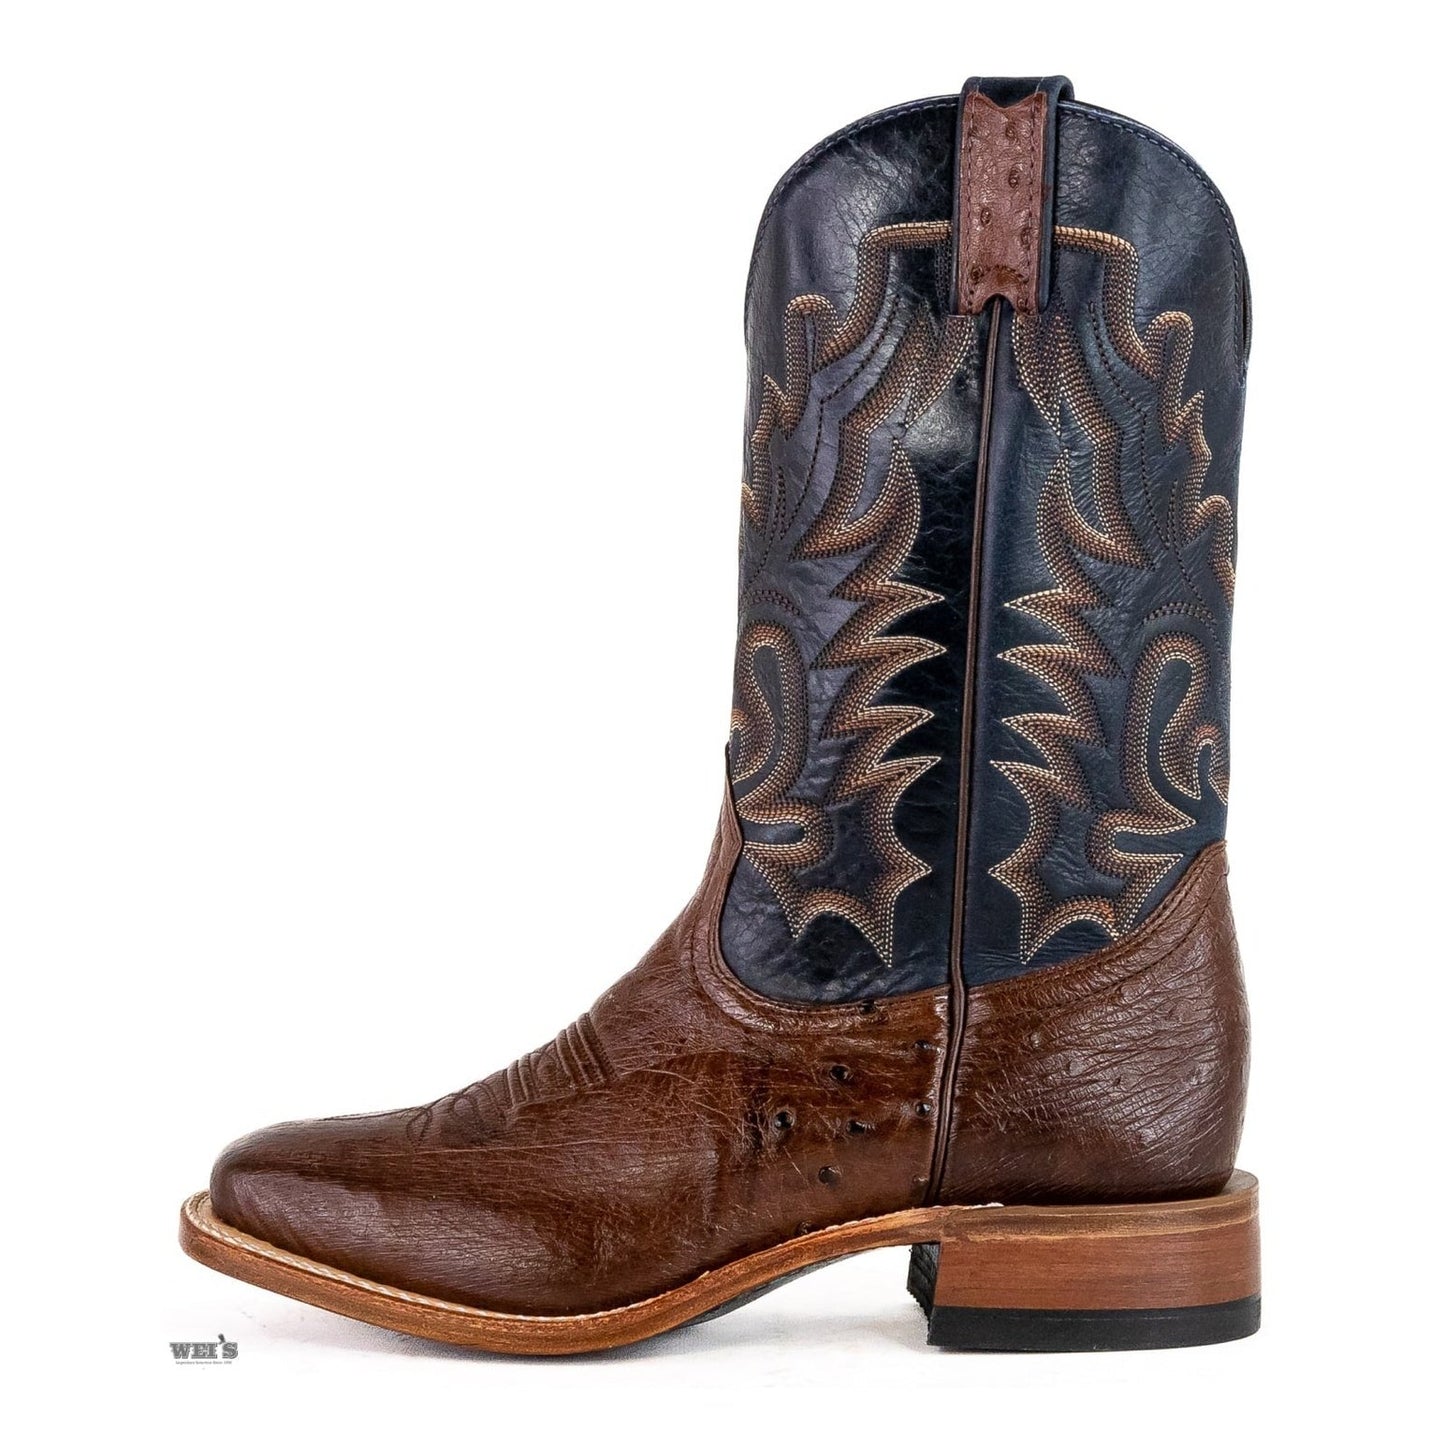 Boulet Men's Cowboy Boots 13" Exotic Ostrich Belly Roper Heel Wide Square Toe 7509